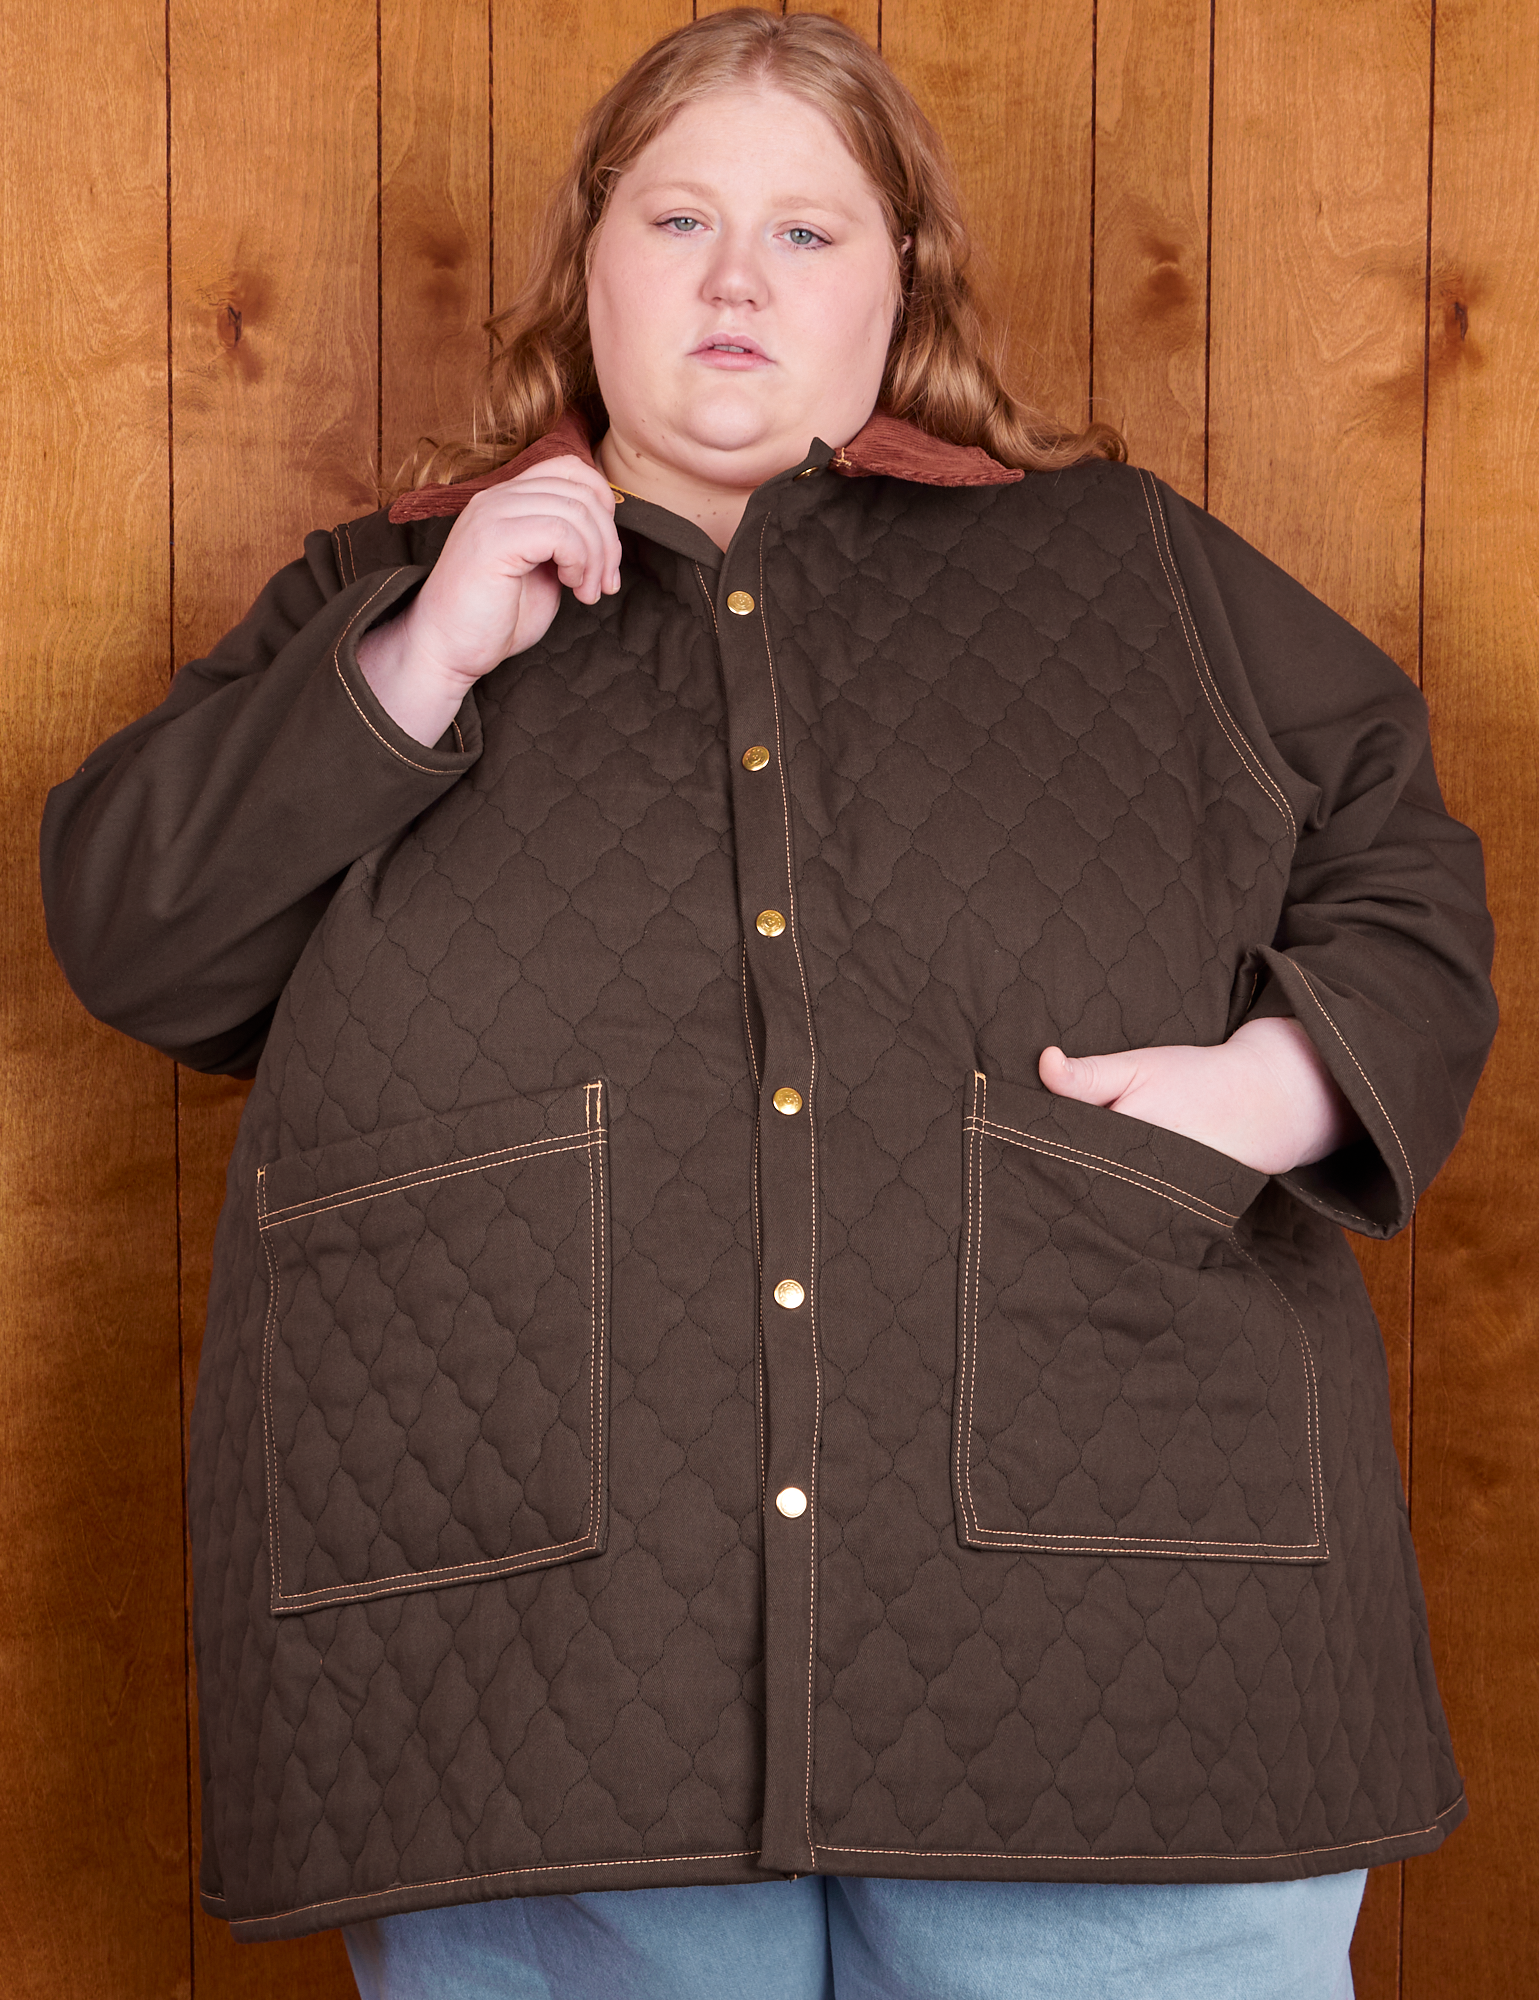 Catie is wearing a buttoned up Quilted Overcoat in Espresso Brown